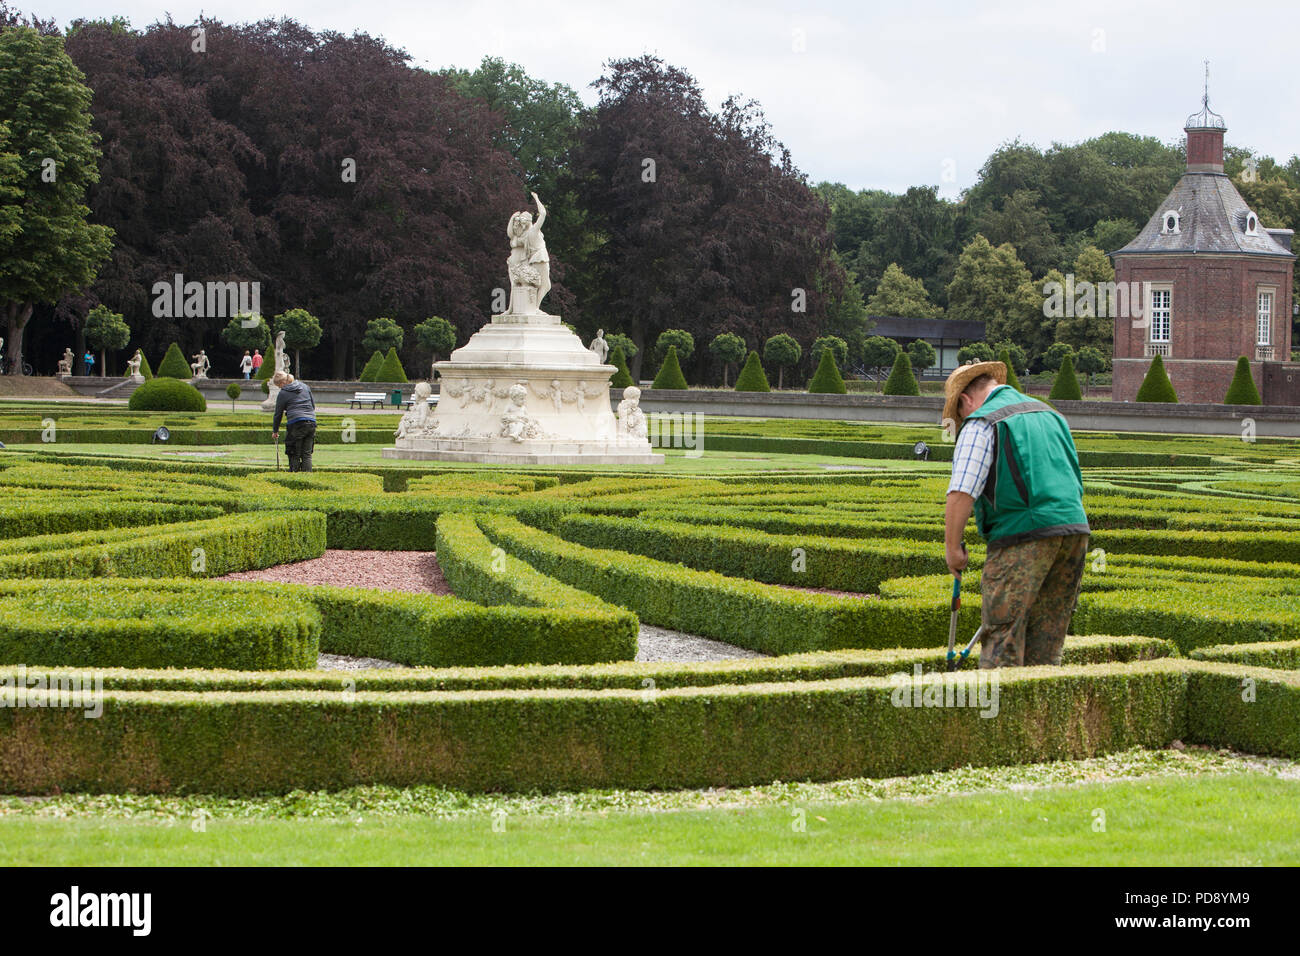 Gardener cutting the low boxwood hedges at Nordkirchen Moated Palace, Germany Stock Photo